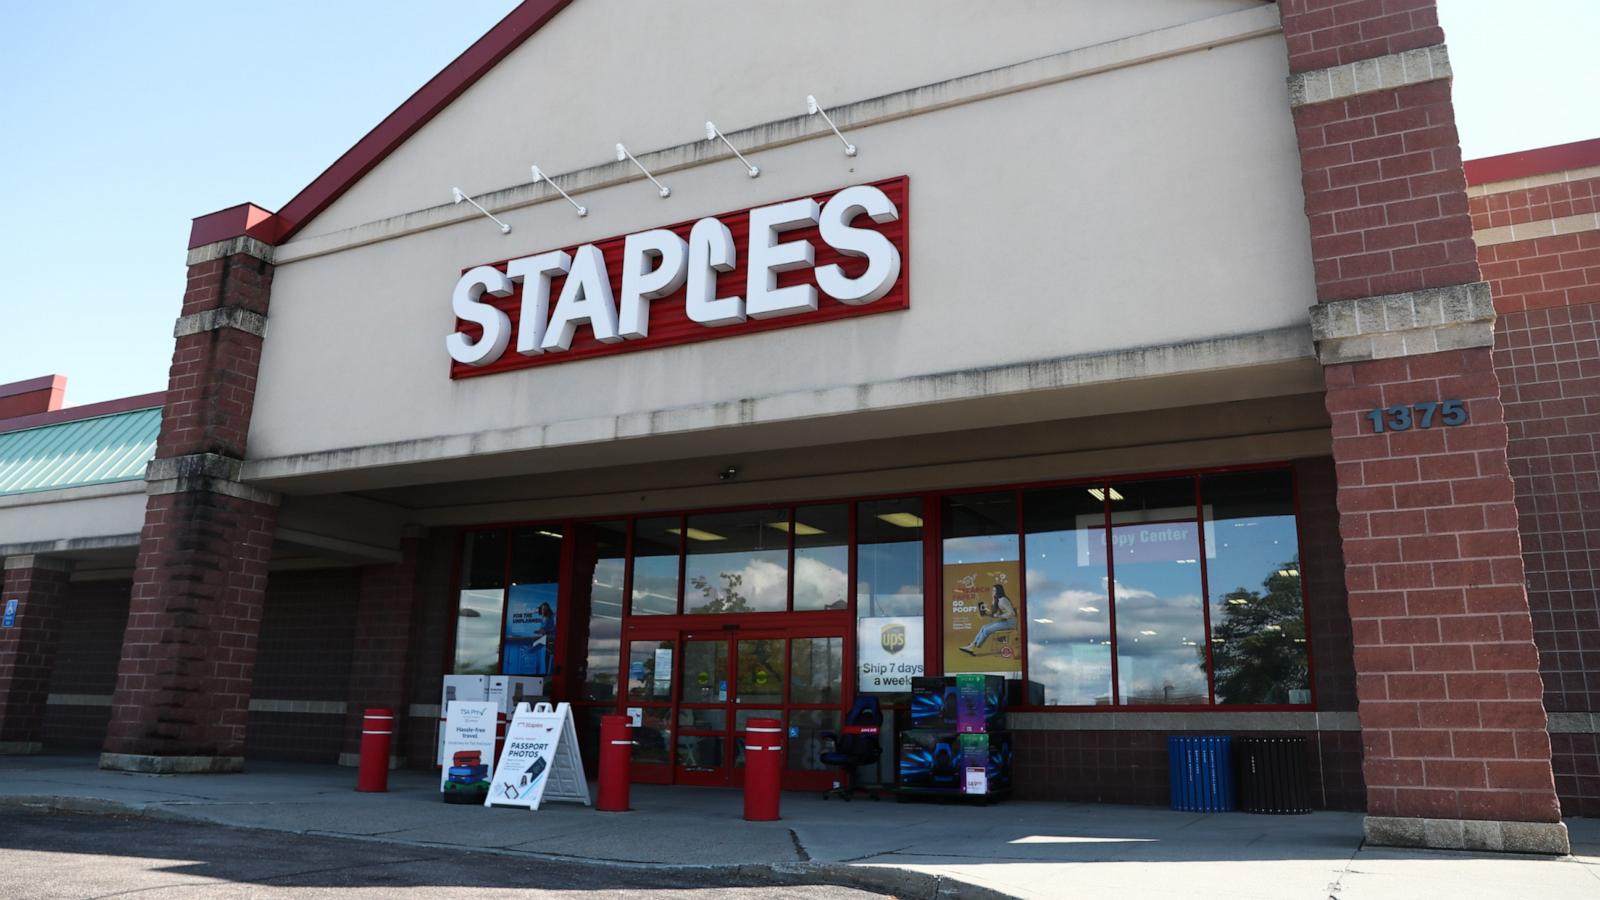 Cyberattack caused 'temporary disruption' to Staples online ordering - ABC  News